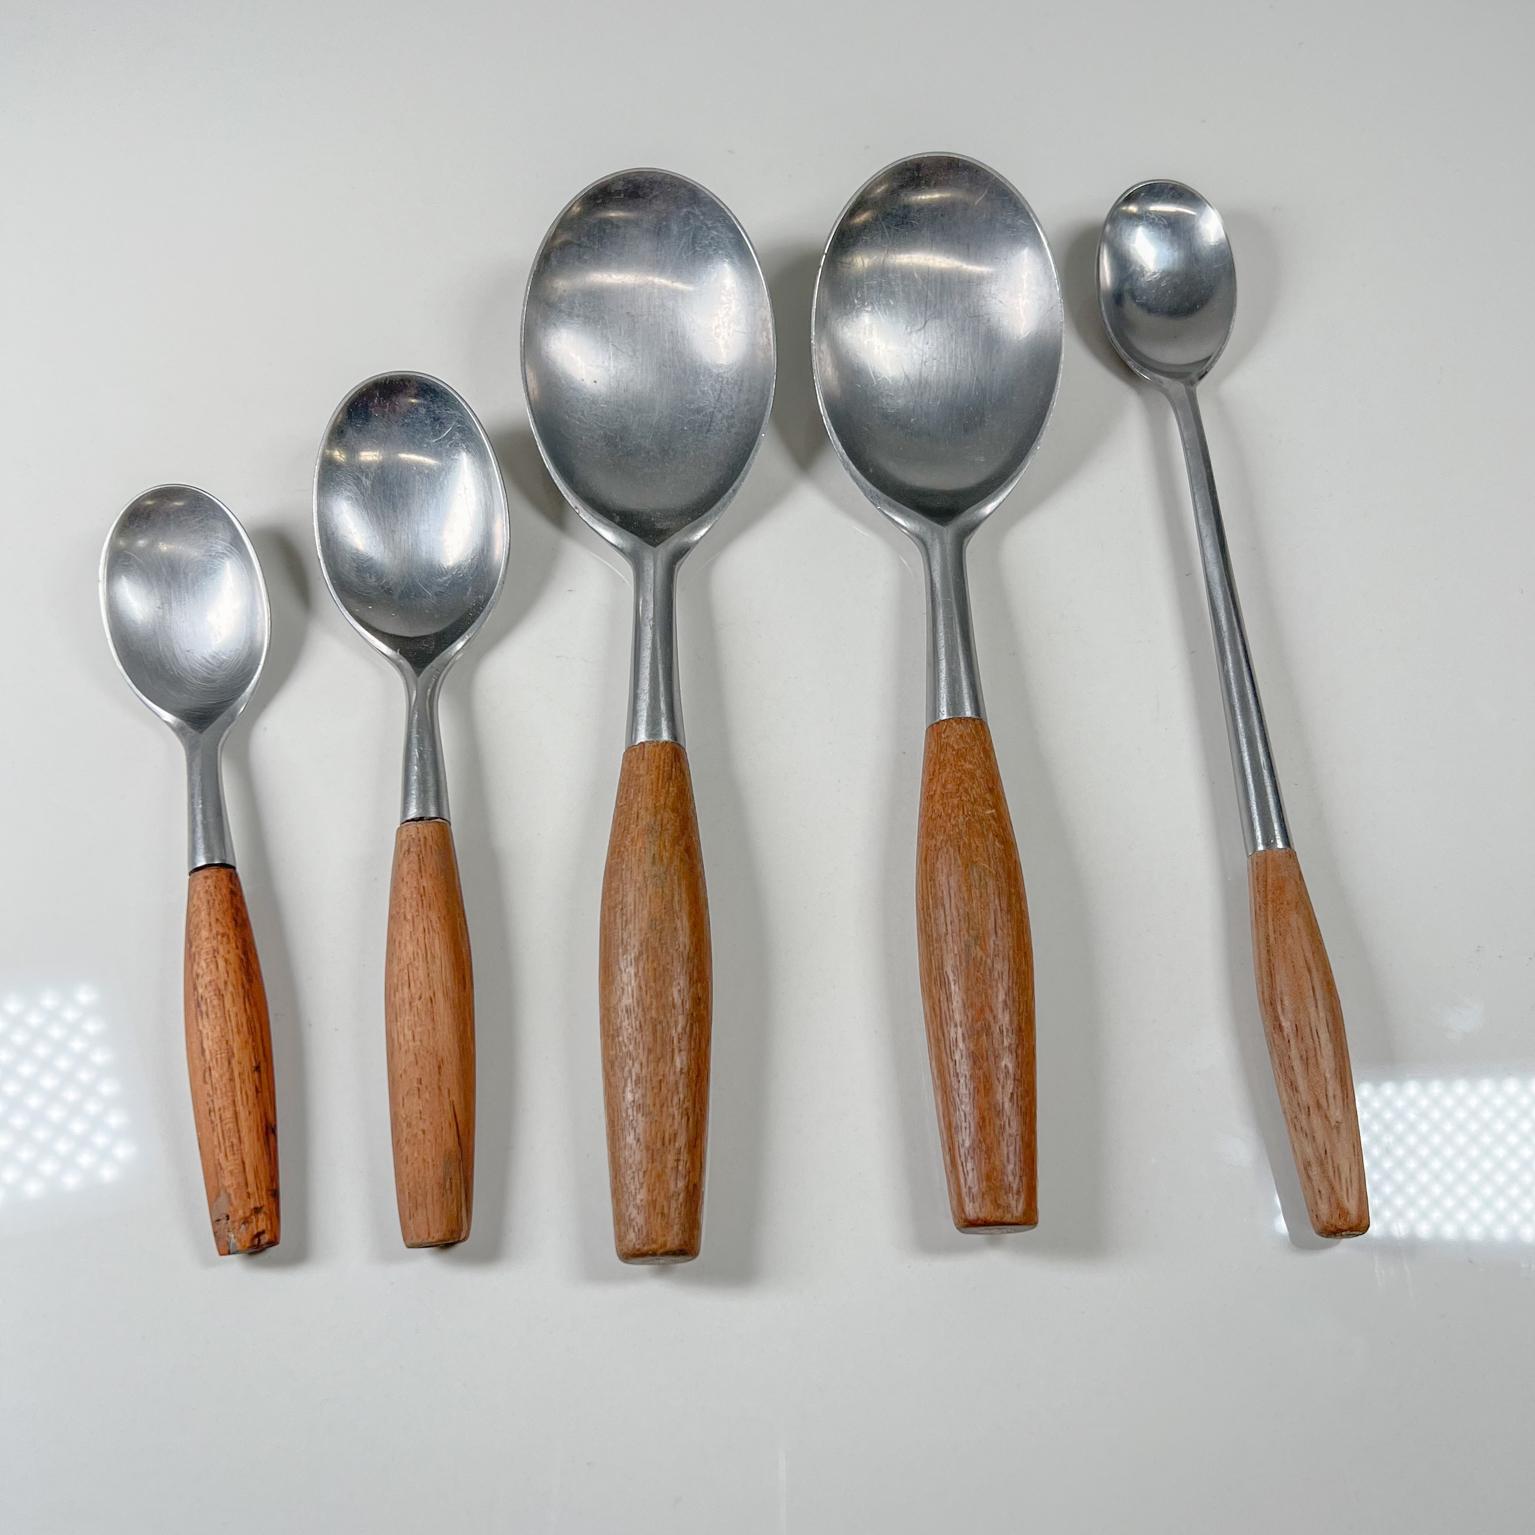 AMBIANIC presents
Dansk IHQ designs made in Germany
Set of 2 large Serving Spoons Teakwood & Stainless Steel
Fjord Flatware 1954 maker stamped
Designed by Jens Quistgaard for Dansk
9 x 2.25
Unrestored preowned original vintage condition.
See